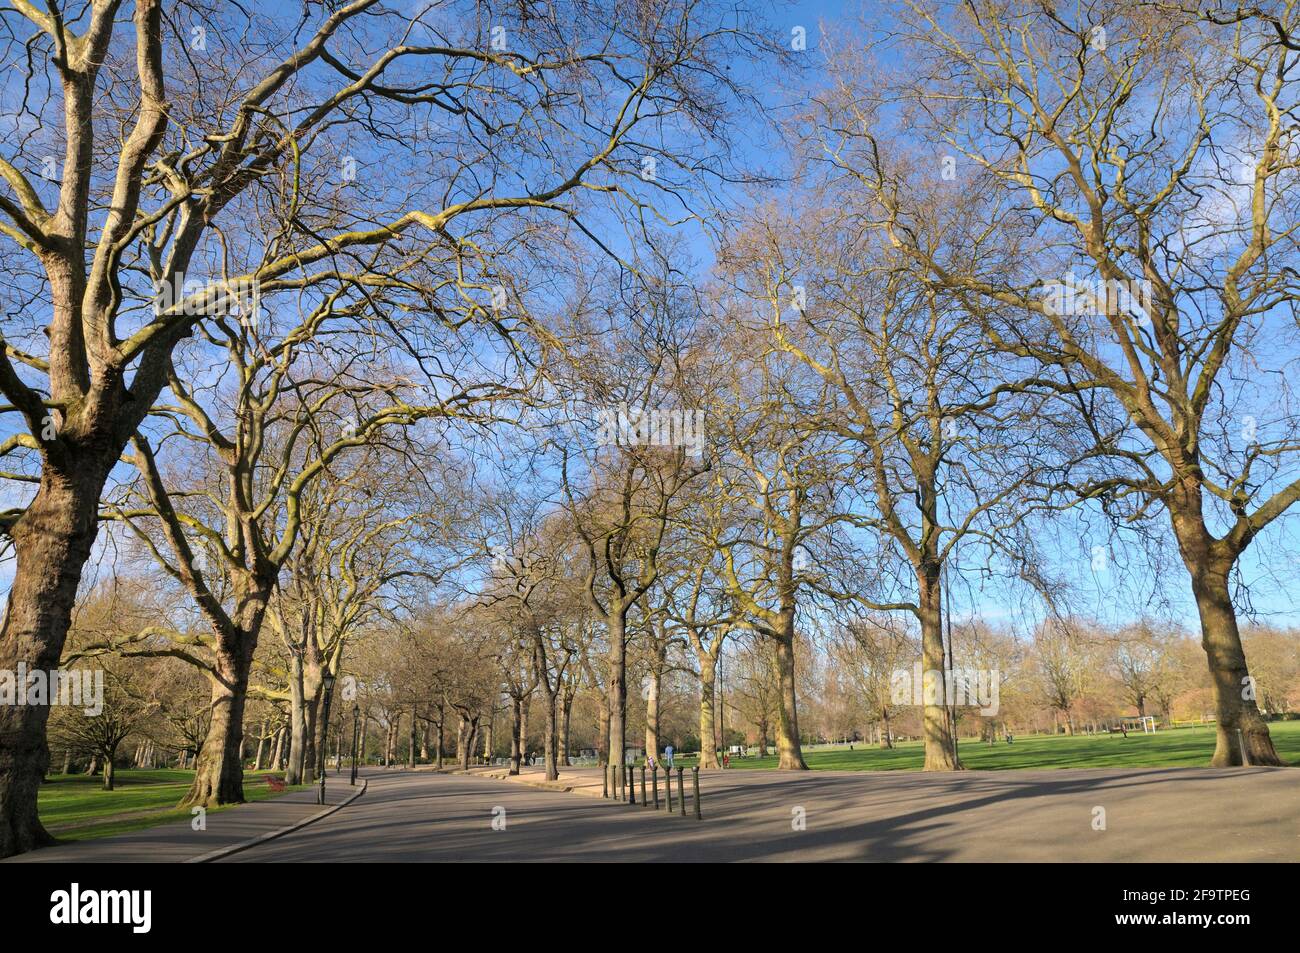 Battersea Park, South West London, London Borough of Wandsworth, England, UK.  Avenue of bare sunlit trees along a path in late winter or early spring Stock Photo